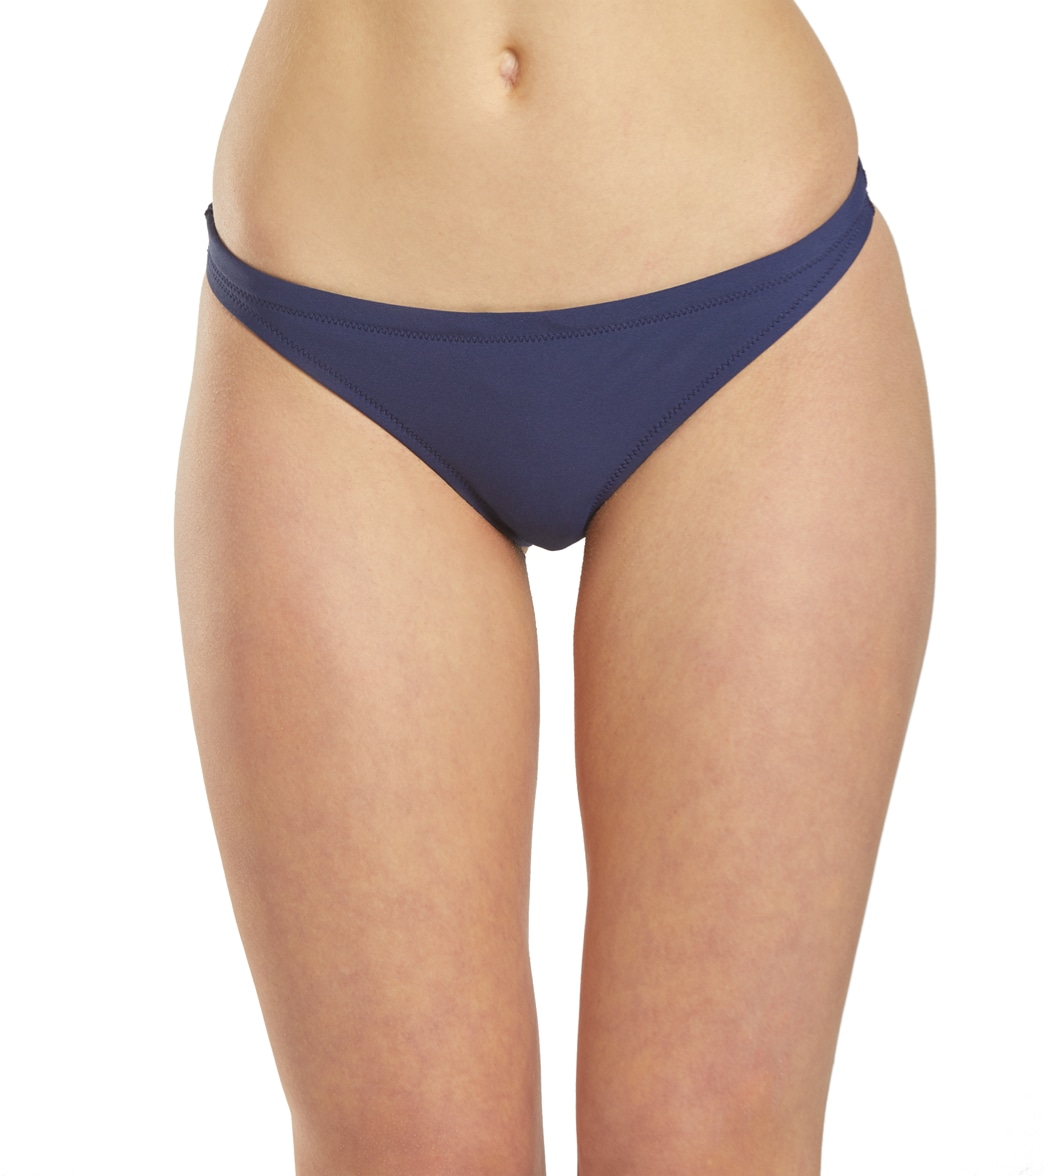 Speedo Women's Solid Classic Swimsuit Bottom - Navy Large Size Large - Swimoutlet.com